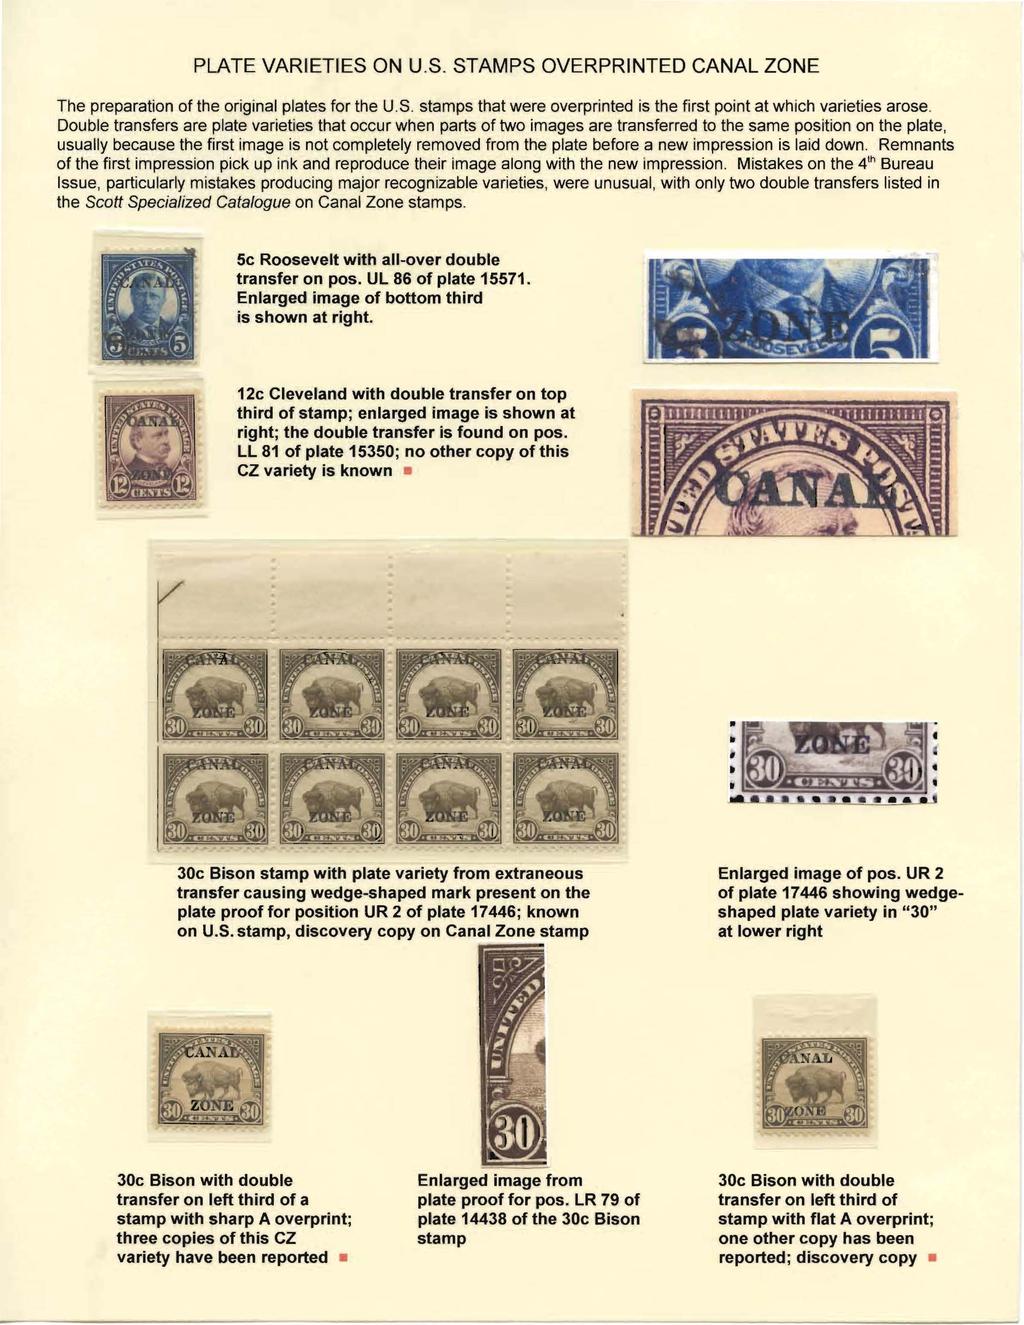 PLATE VARIETIES ON U.S. STAMPS OVERPRINTED CANAL ZONE The preparation of the original plates for the U.S. stamps that were overprinted is the first point at which varieties arose.